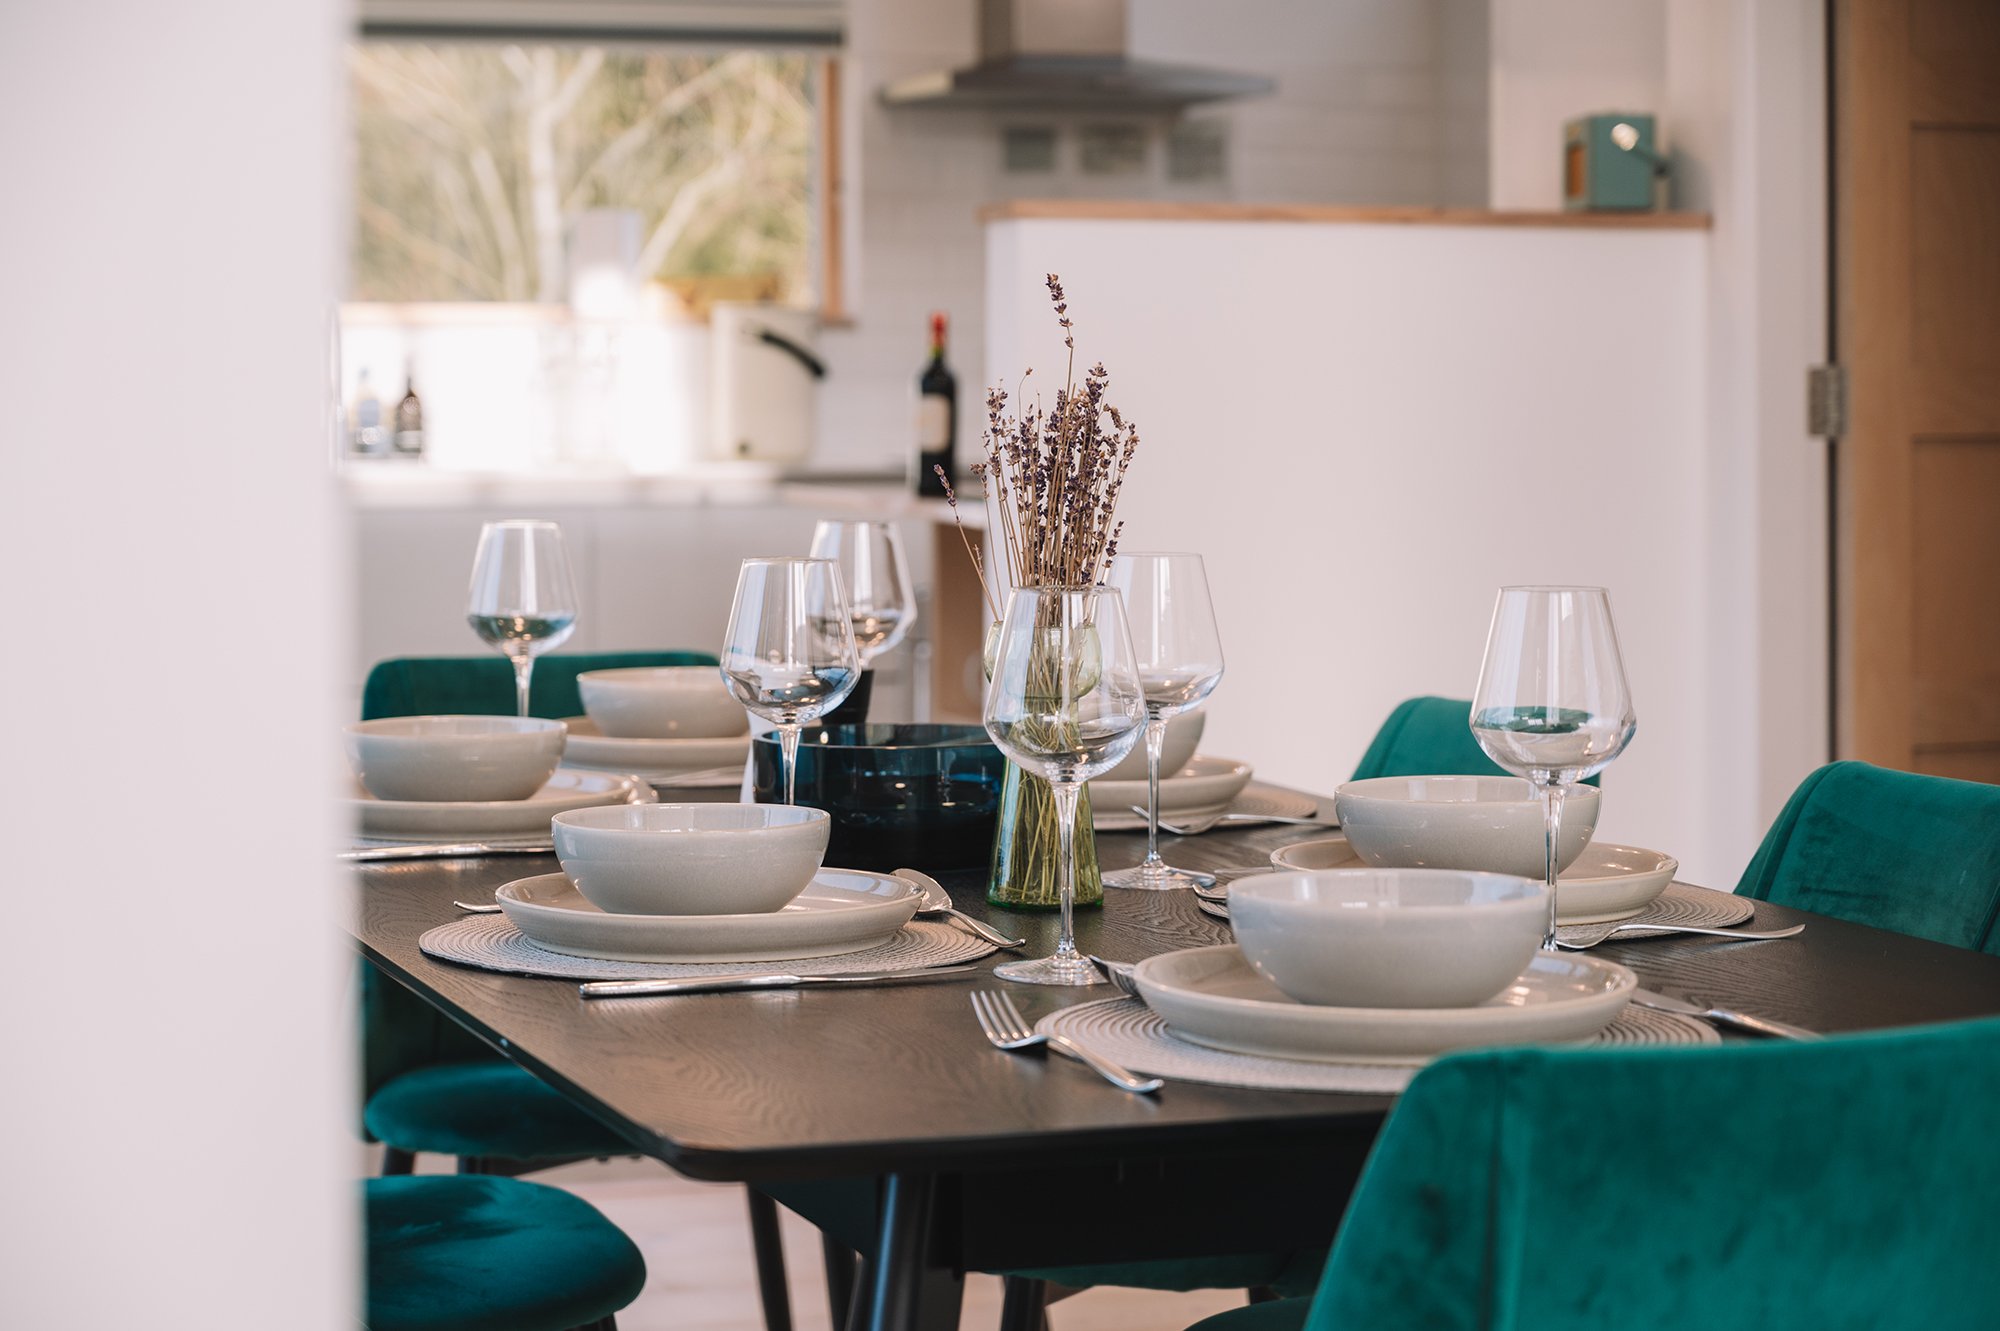 Looking for the perfect meet in the middle location for your annual 'we should meet up more' s? Whether it's your in-laws or friends you just don't get to see often enough - we've got the perfect location.

With our brand new private chef fine-dining